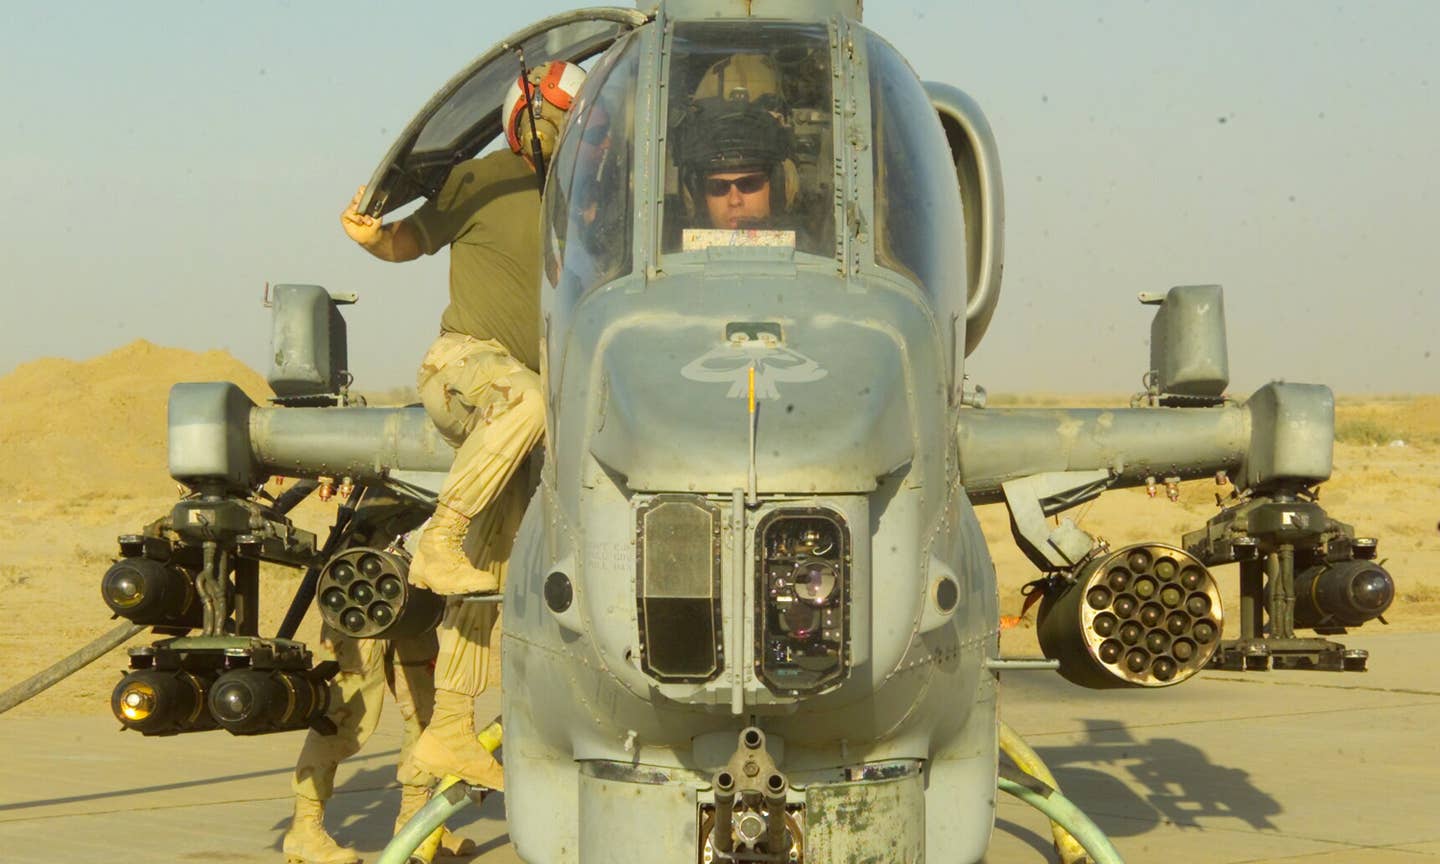 A Marine from Heavy Mobile Helicopter Squadron 169, speaks to the copilot of an AH-1 Cobra while refueling at a Forward Operating Base in Iraq April 11 while in support of Operation Iraqi Freedom. Operation Iraqi Freedom is the multinational coalition effort to liberate the Iraqi people, eliminate Iraq's weapons of mass destruction and end the regime of Saddam Hussein. (USMC photo by Lance Cpl. Jonathan P. Sotelo)